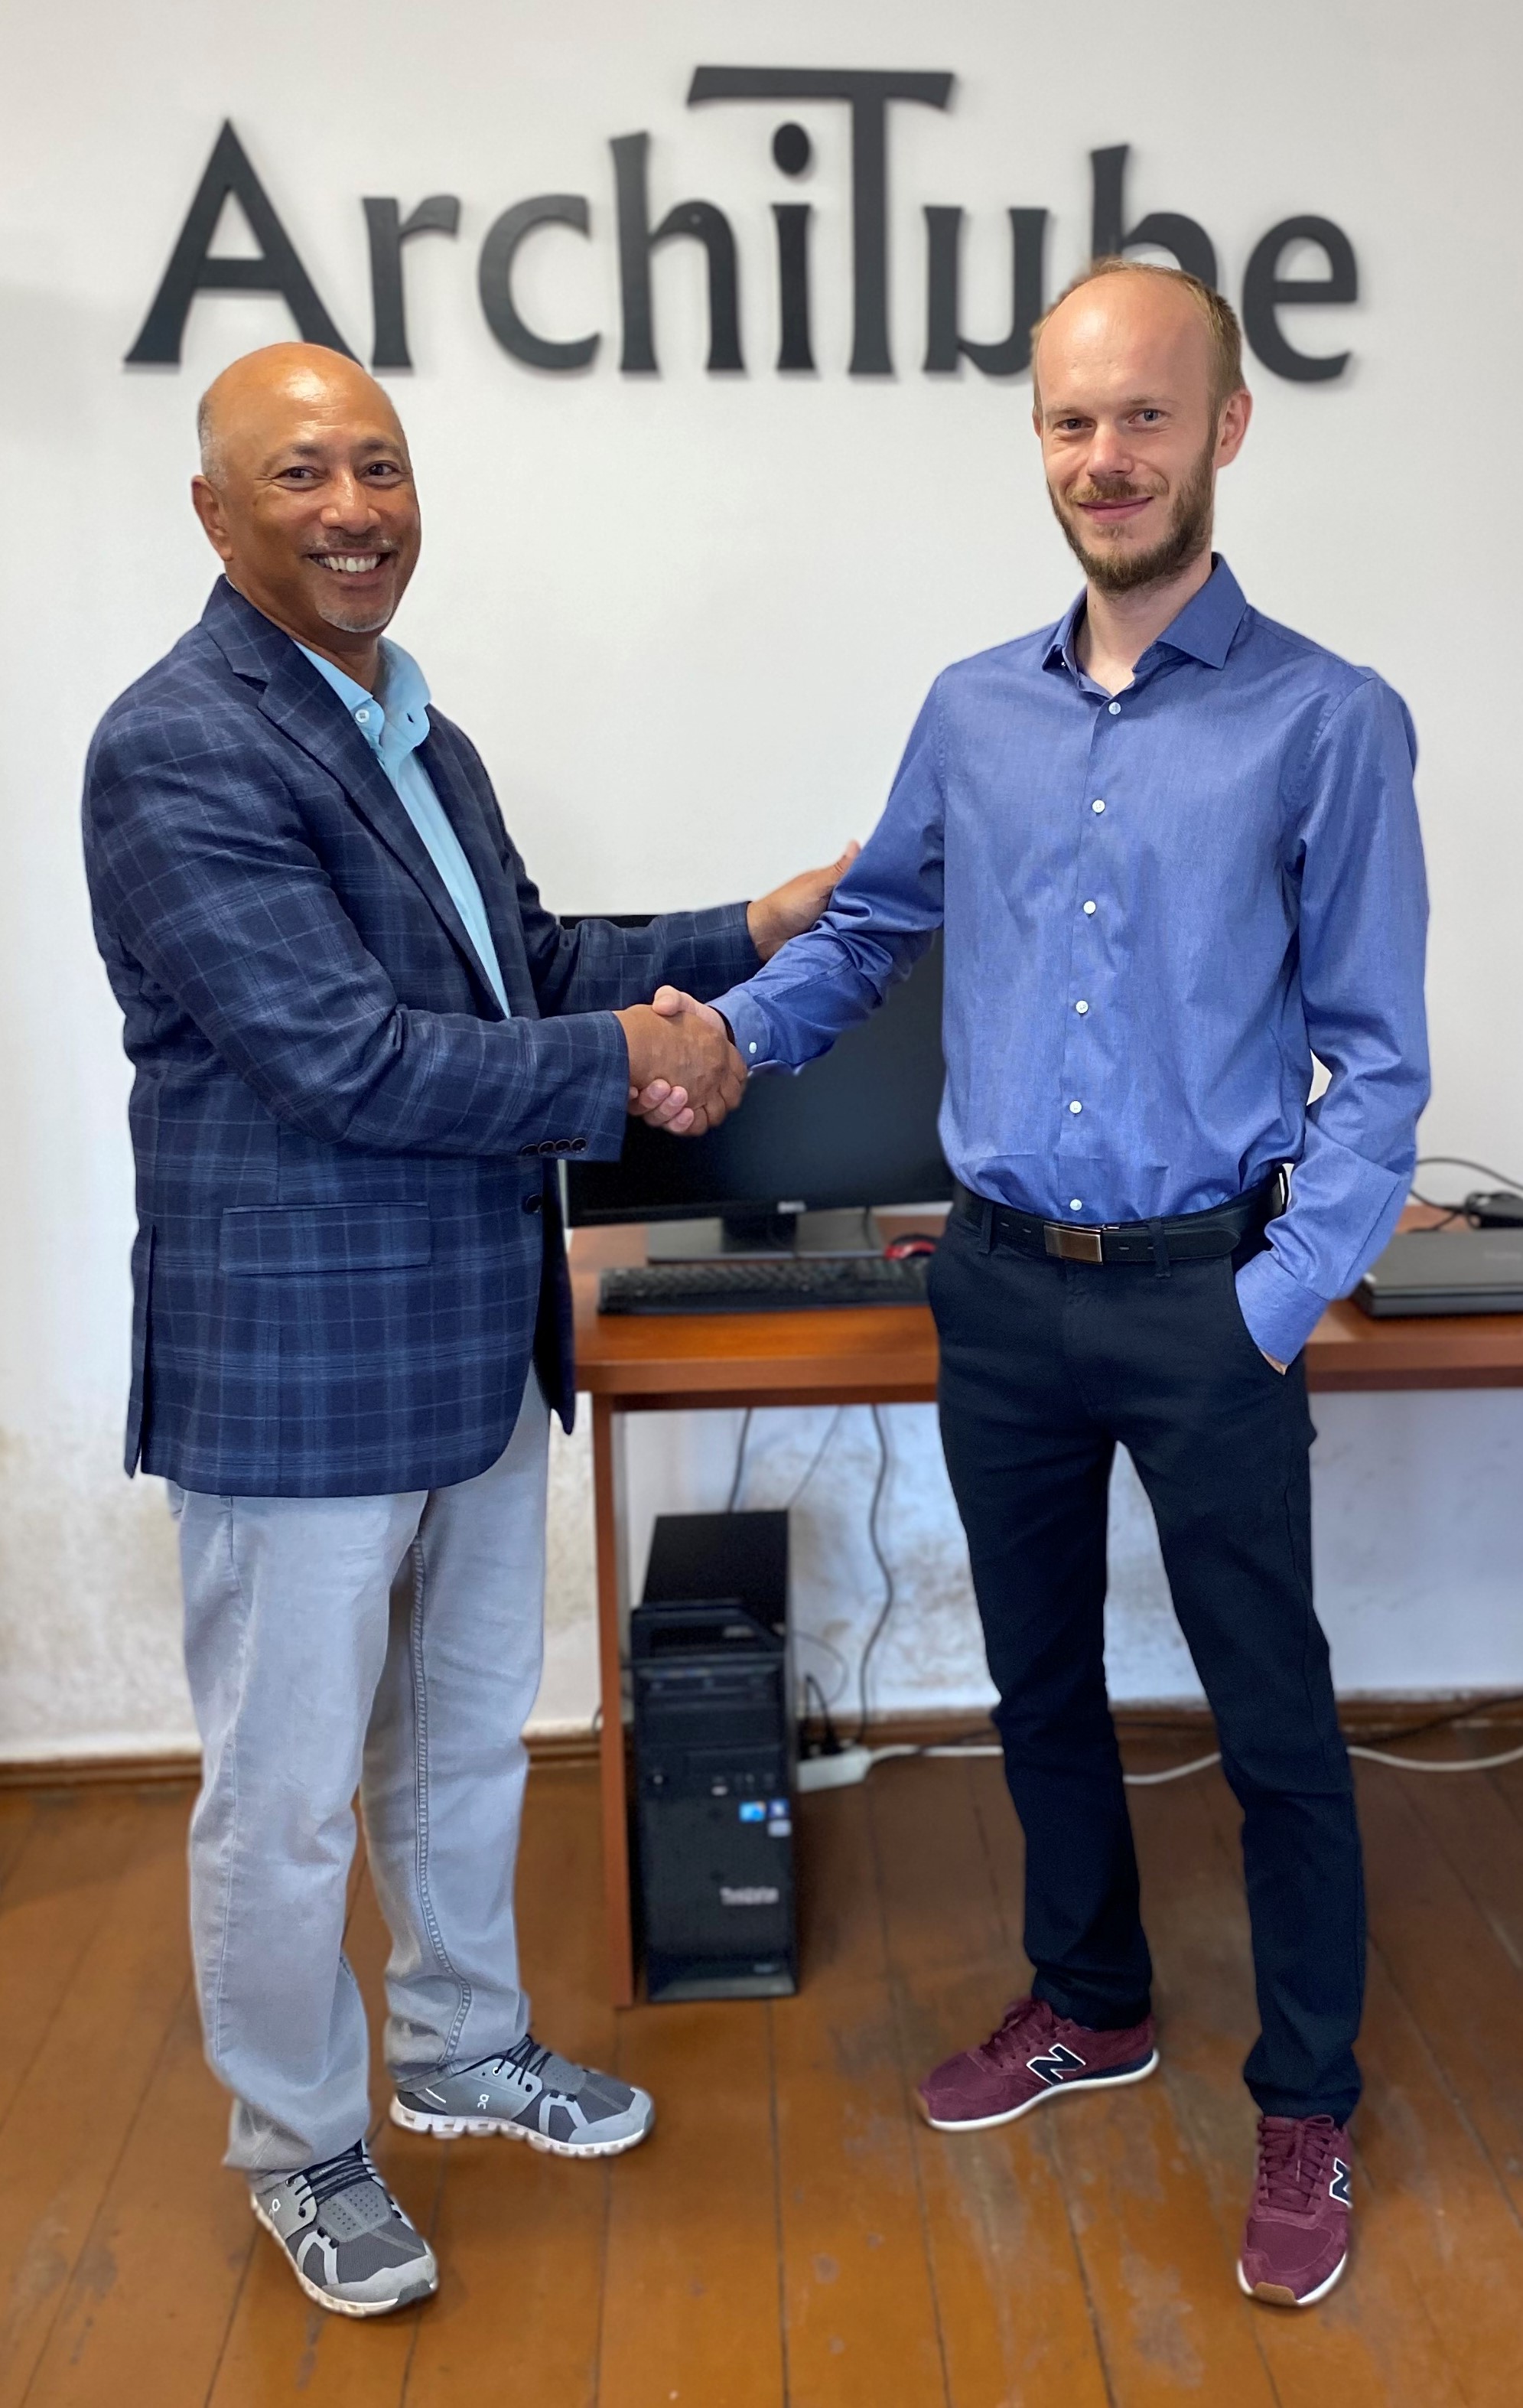 L to R: President Bony Dawood, PE, welcomes ArchiTube's Adam Grewenda to the Dawood family of companies.